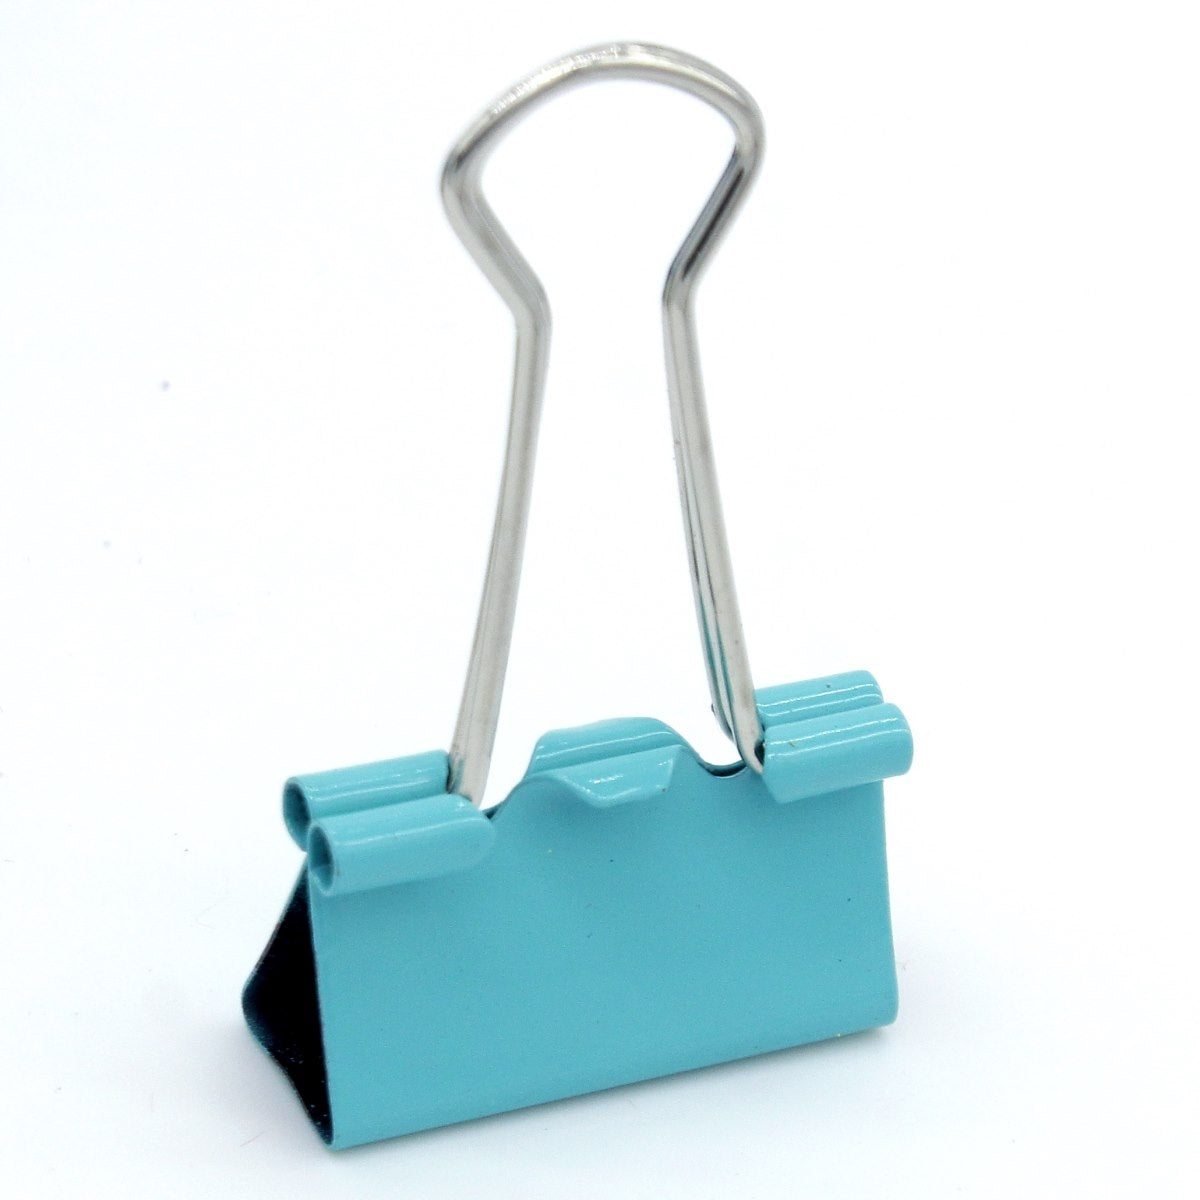 Set of 48 Pcs Binder Clips Assorted Colors 25mm - For Shops, Schools, Corporates, Office Use JABCC25MM